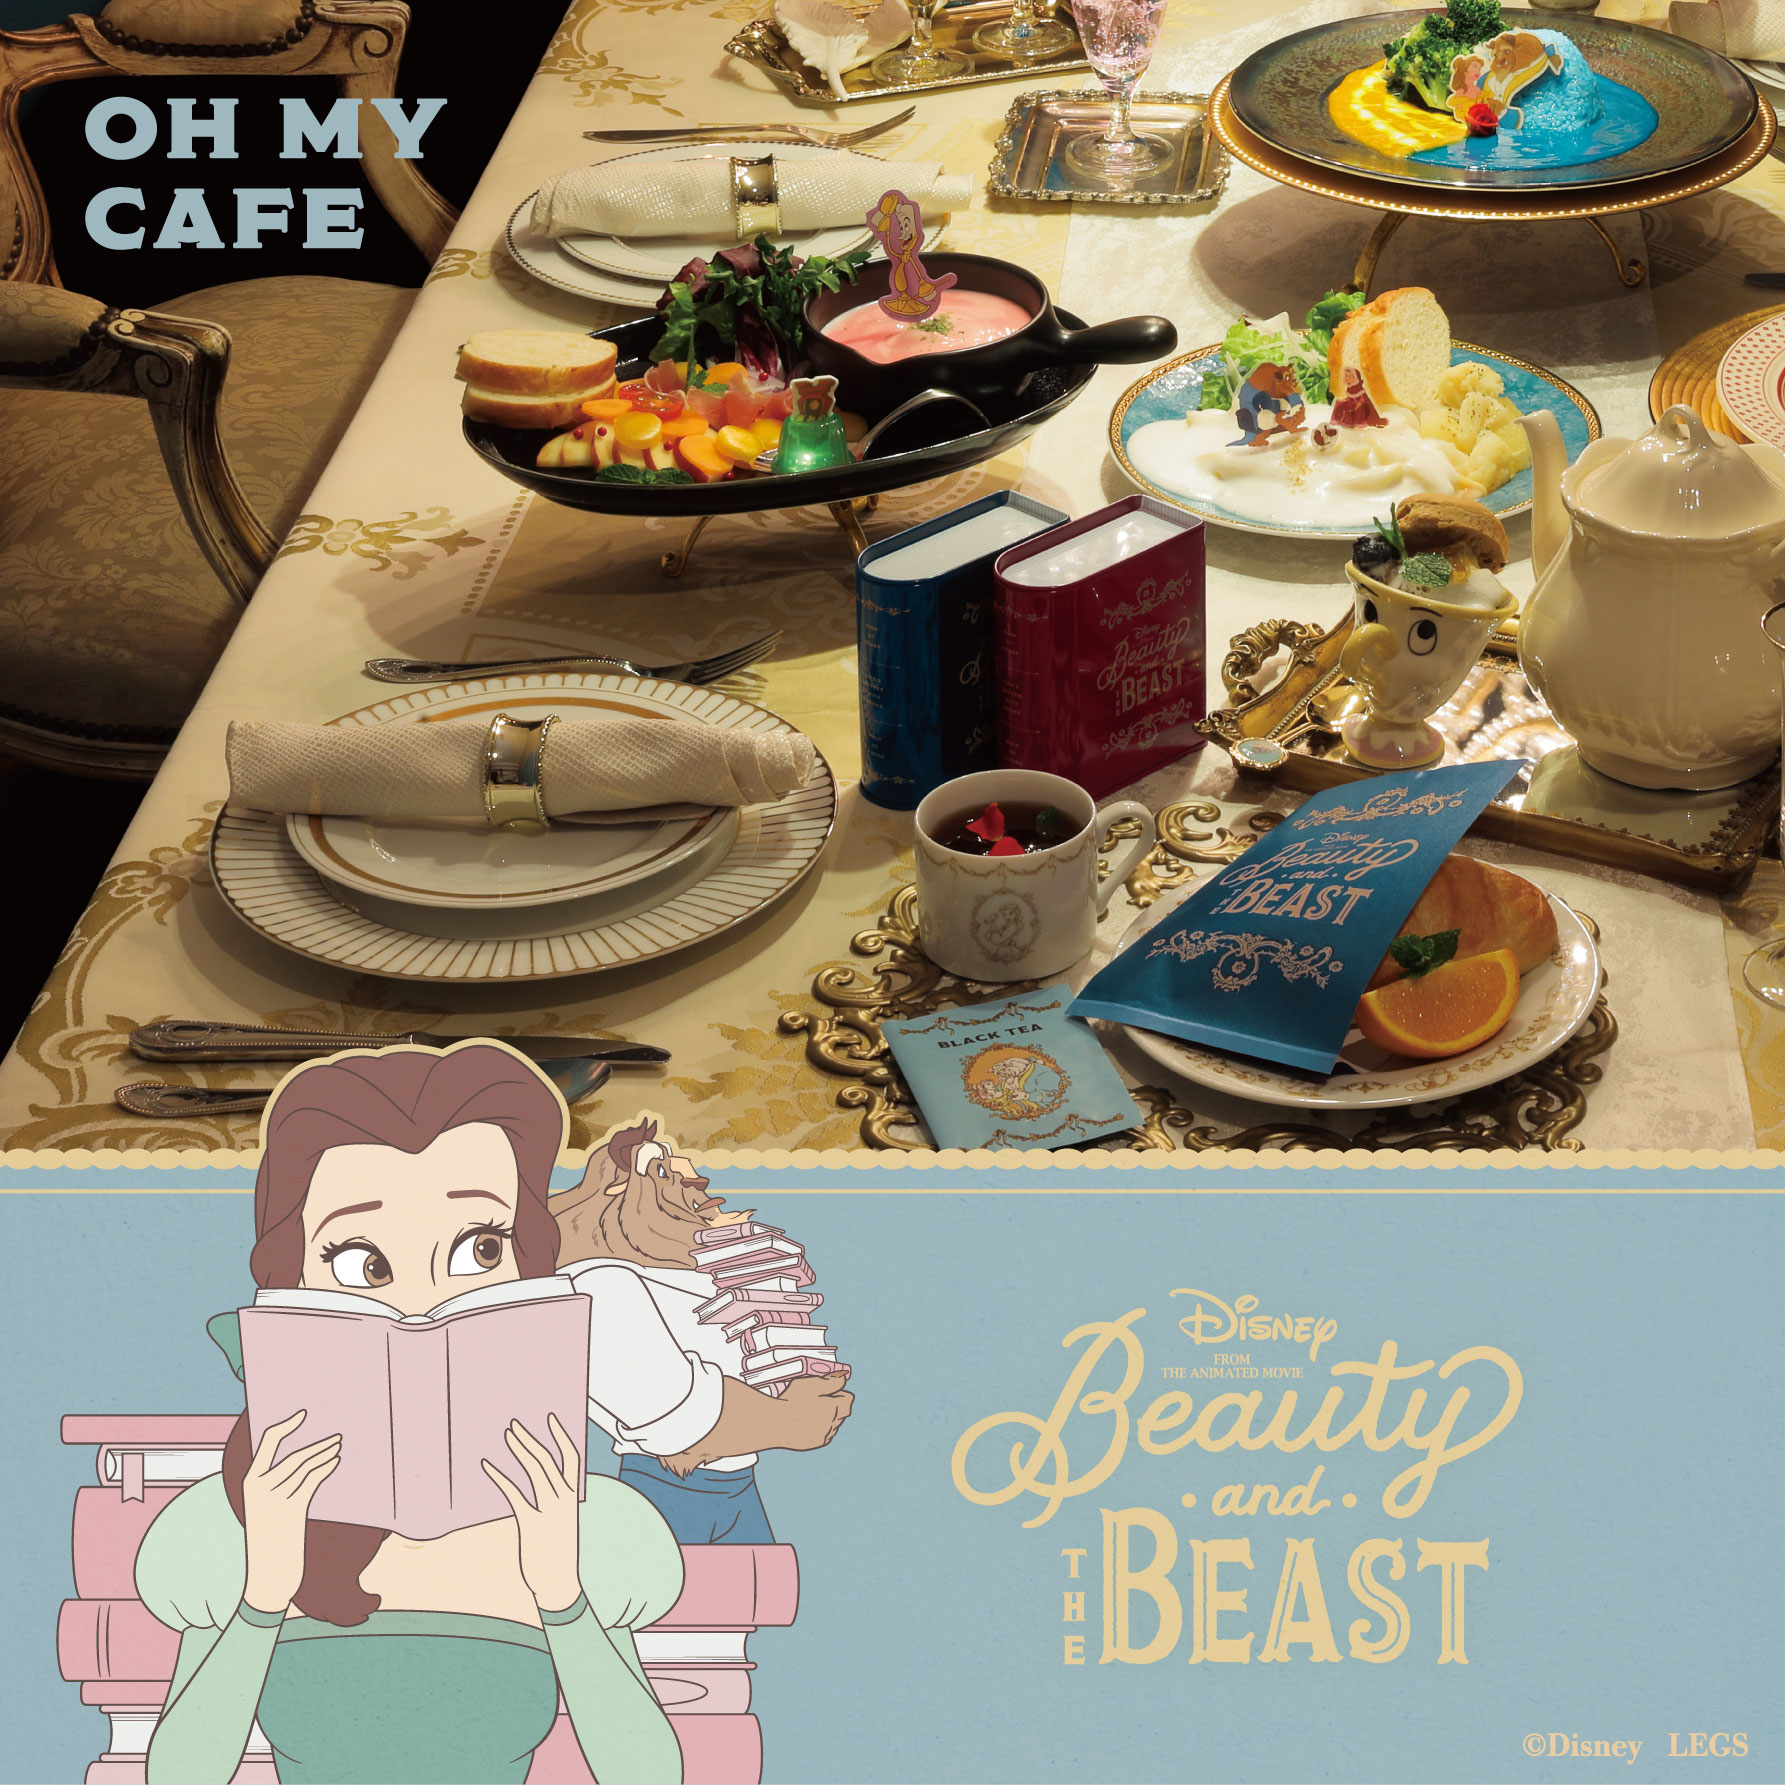 Beauty and the Beast Cafe in Japan 2020